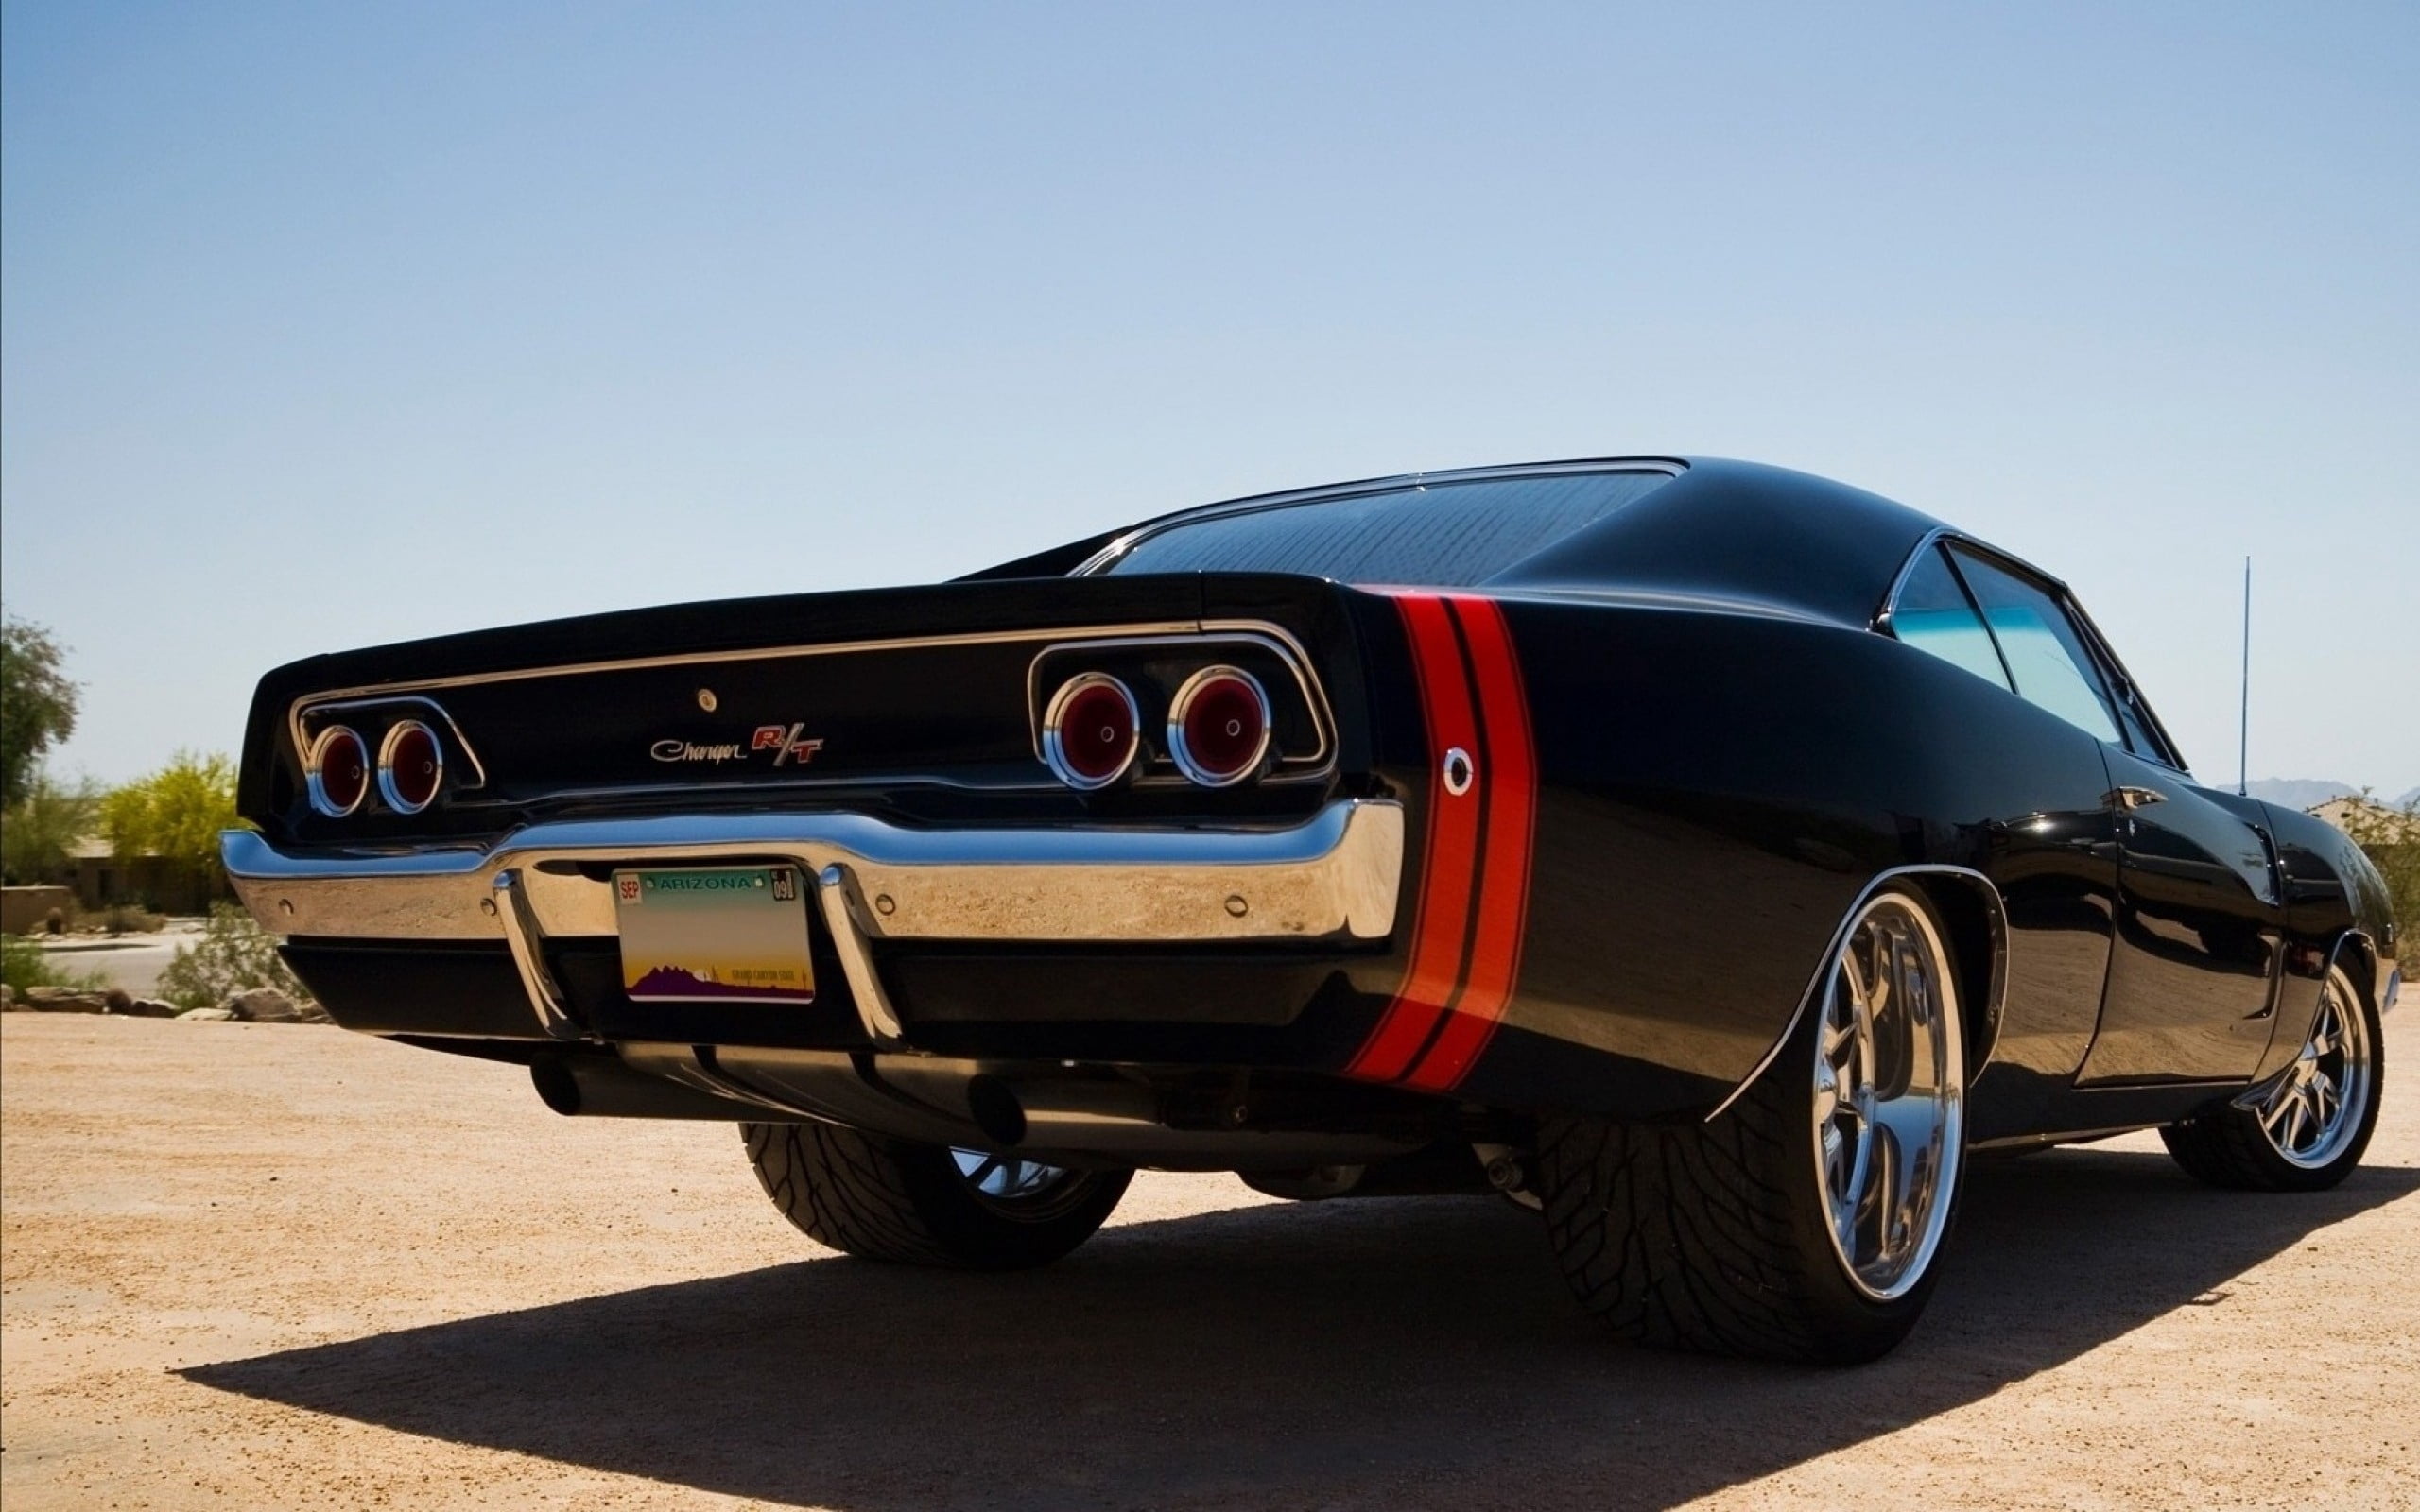 black muscle car, muscle cars, dodge, dodge charger, stylish